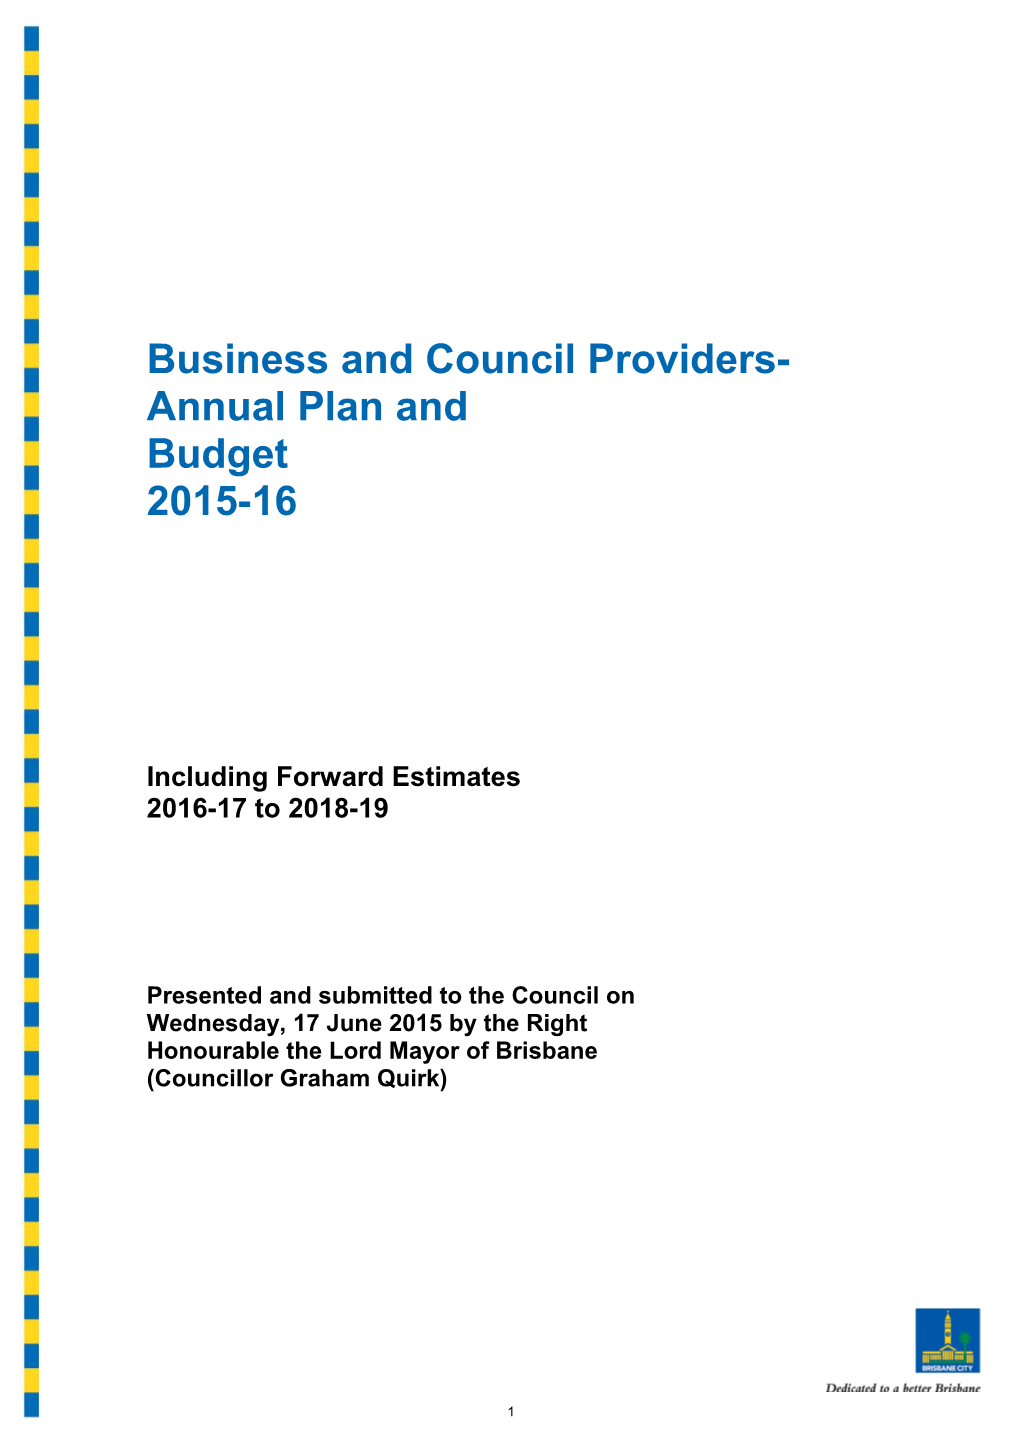 Business and Council Providers